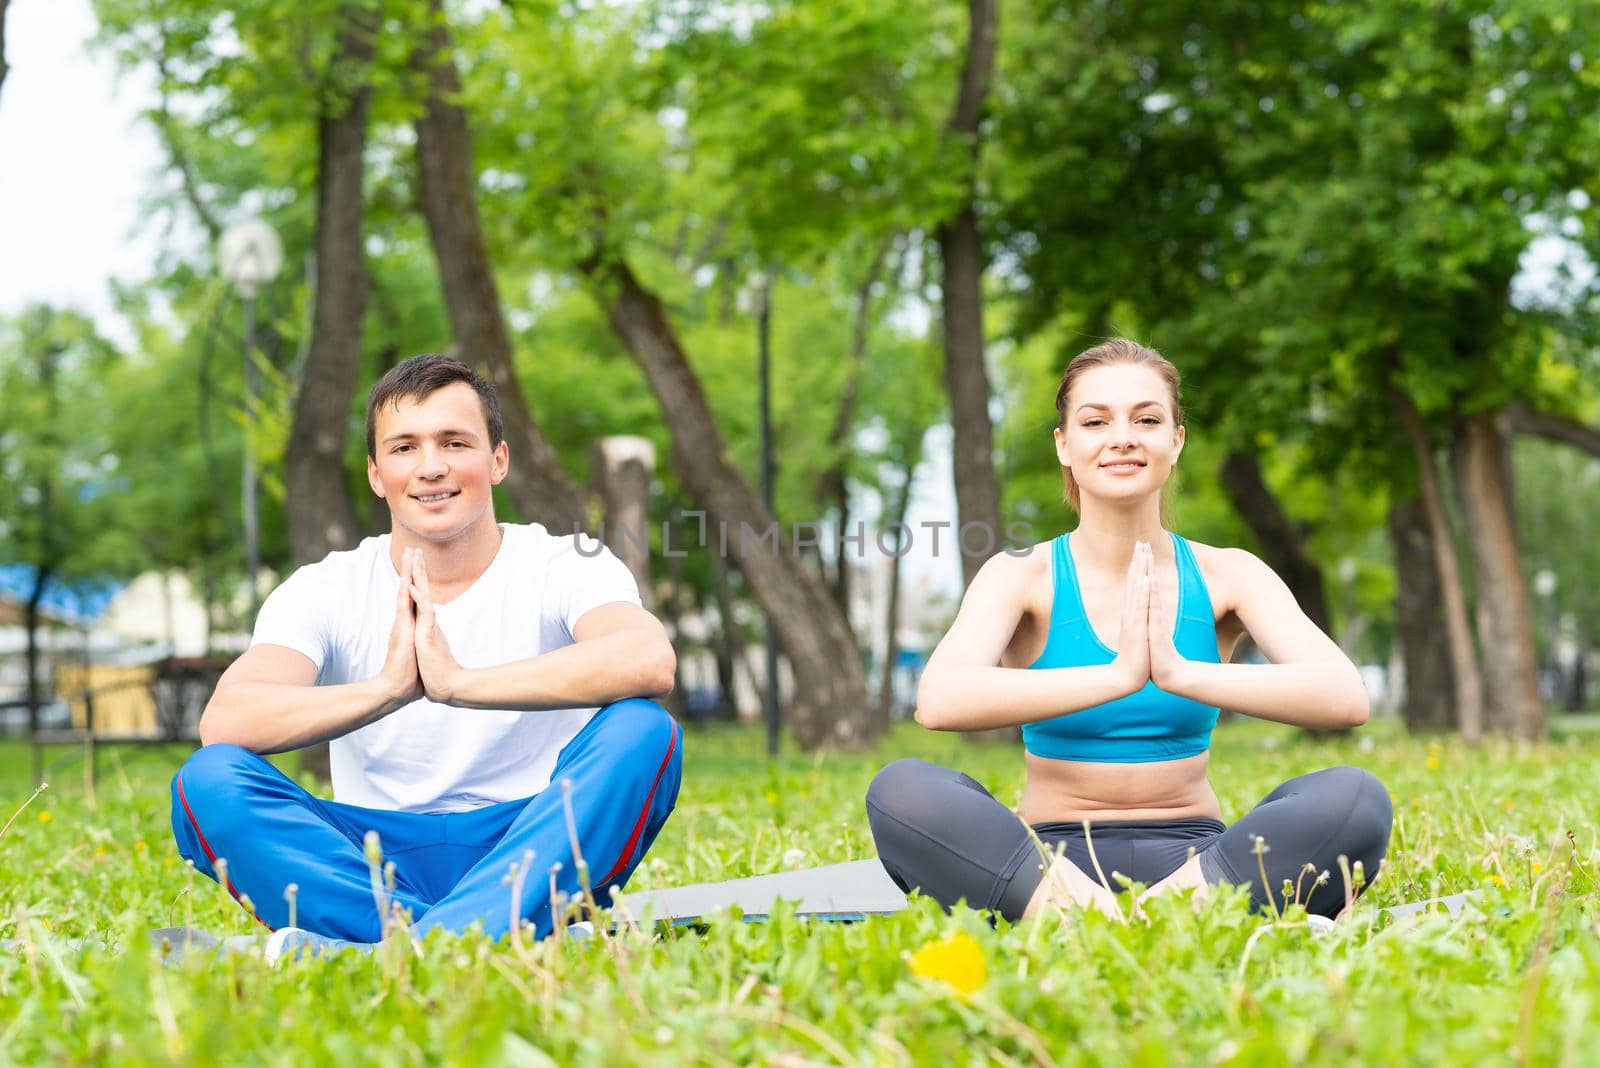 Young couple doing yoga in park together. Man and woman sitting in yoga pose on green grass. Training and meditation in yoga class outdoor at sunny summer day. Morning exercises and healthy lifestyle.